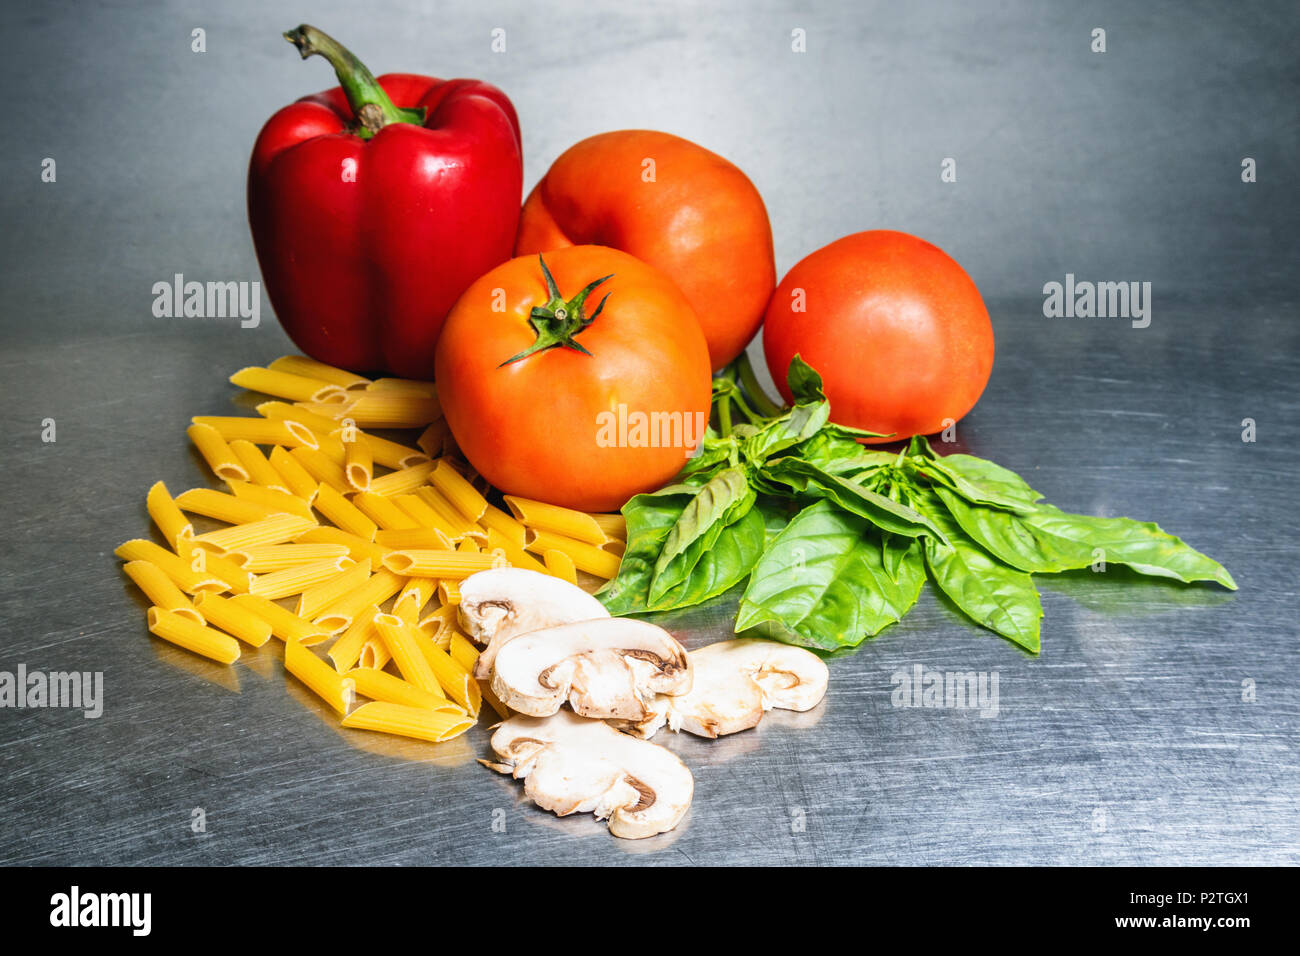 ingrediants for cooking on a stainless steel background Stock Photo